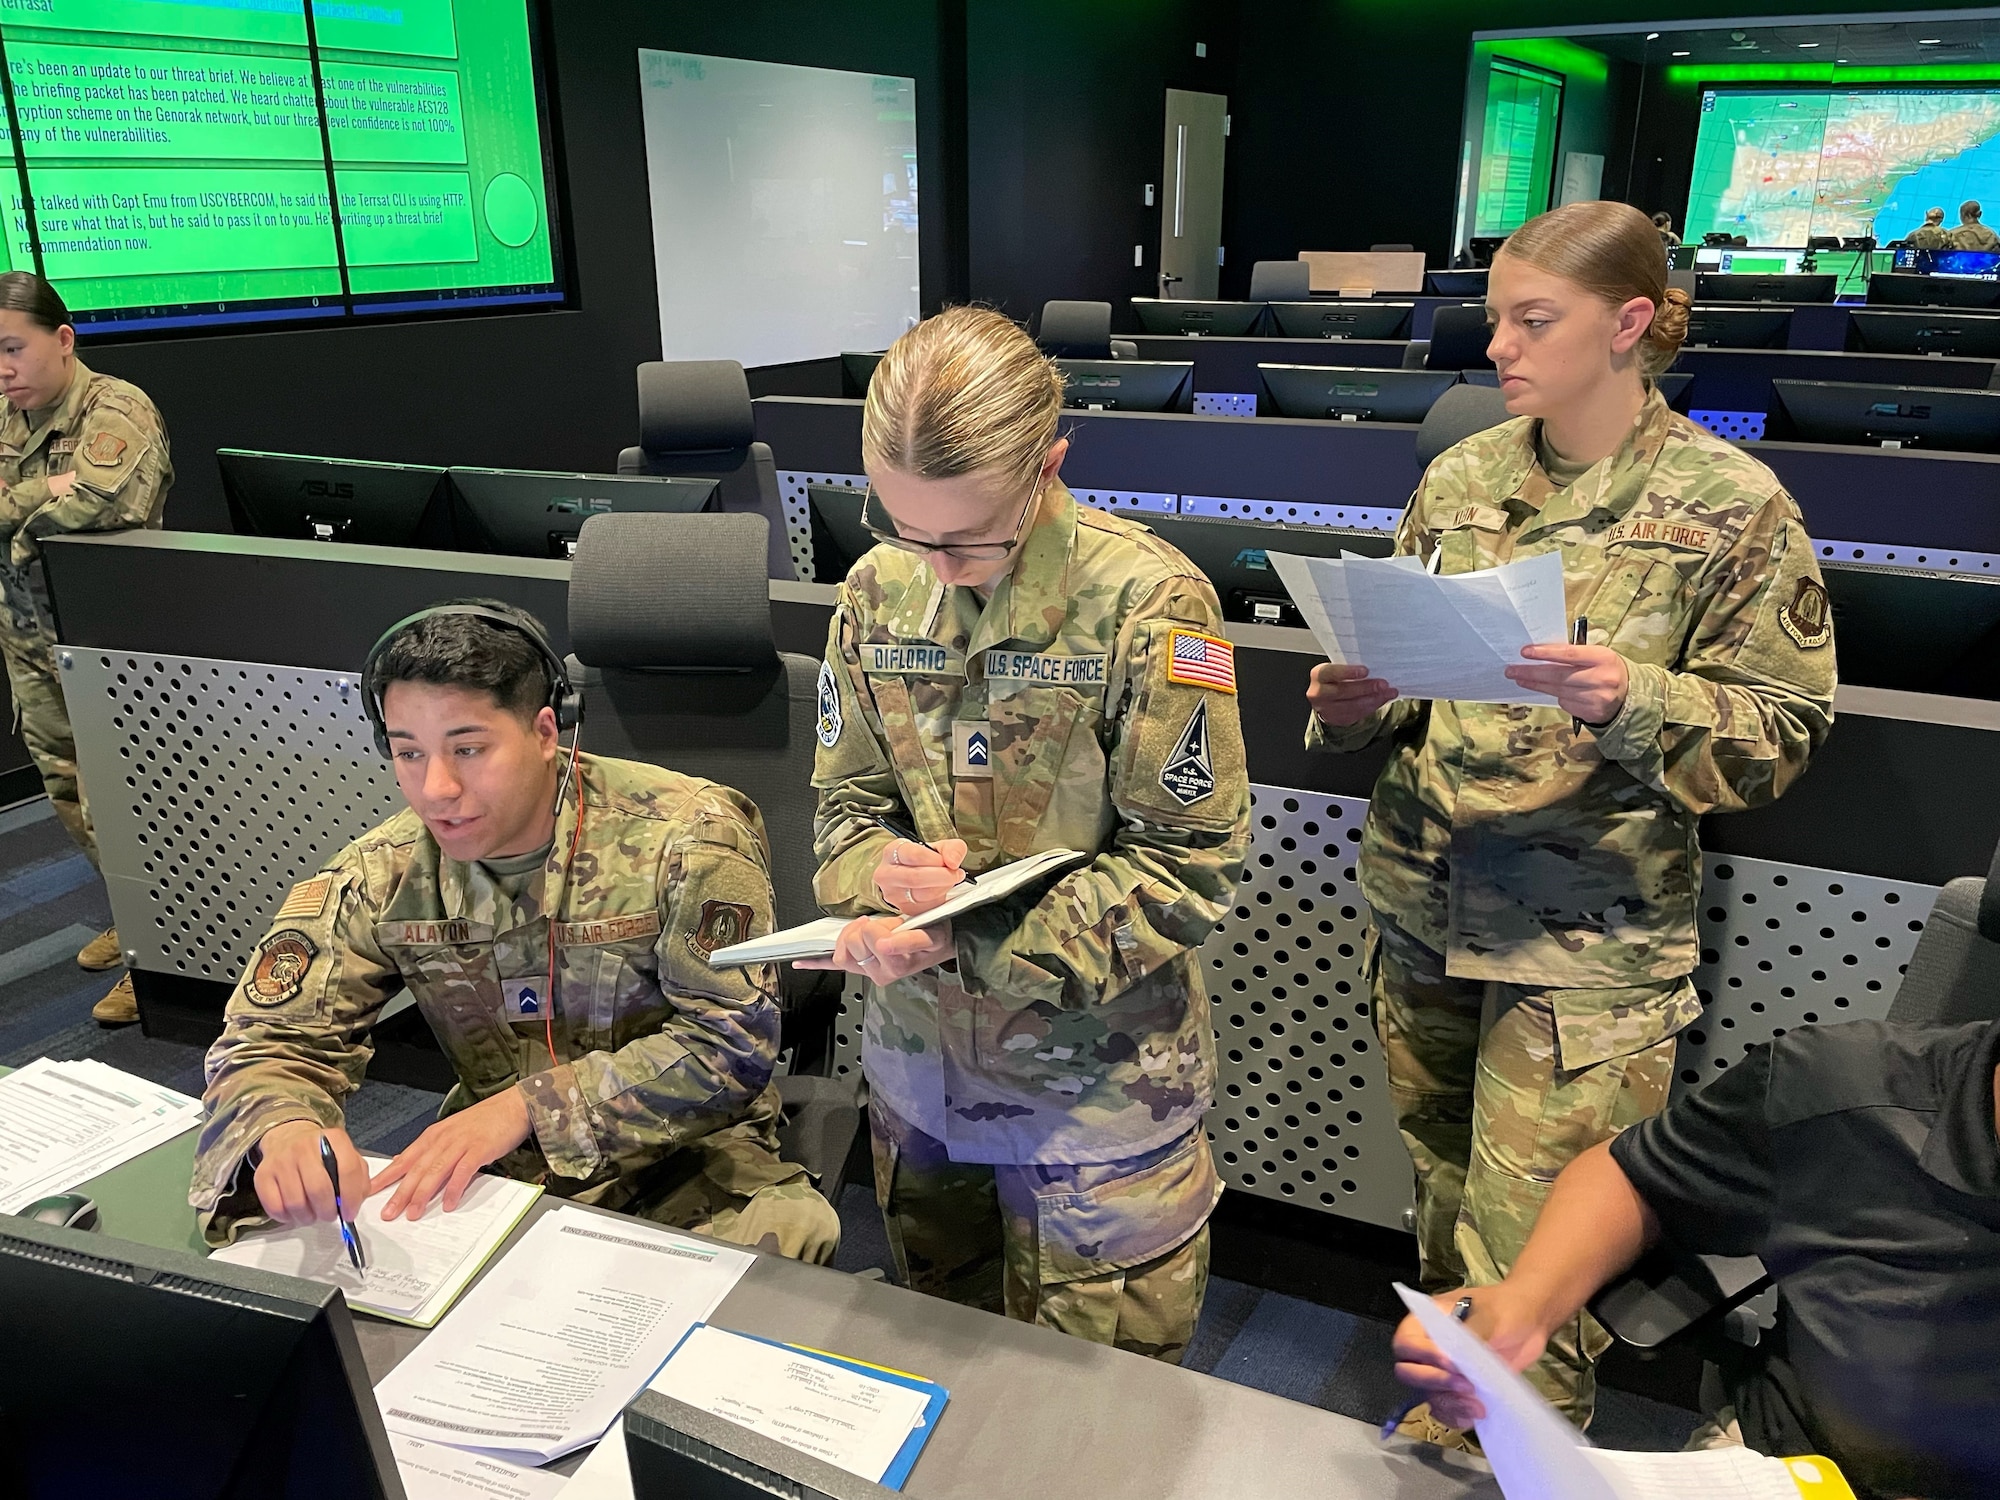 Air Force ROTC cadets conduct cyber field training exercise at the Rochester Institute of Technology Operations Center Training facility in Rochester, New York on April 22, 2023. Cadets disabled 30 mock enemy satellites using various techniques such as buffer overflows, brute force and packet sniffing.